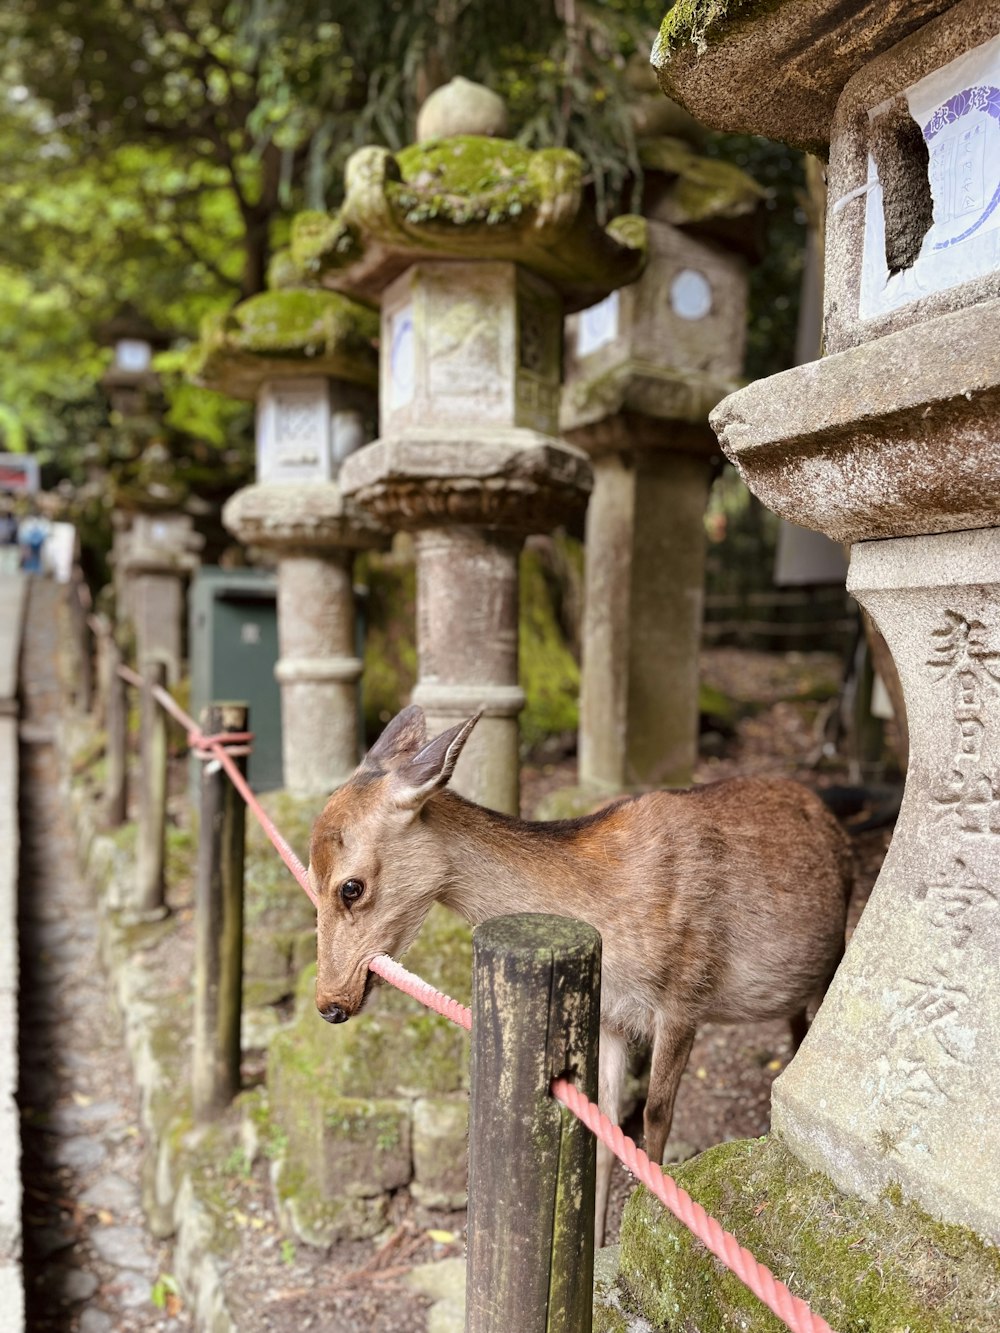 a small goat tied to a fence in a park